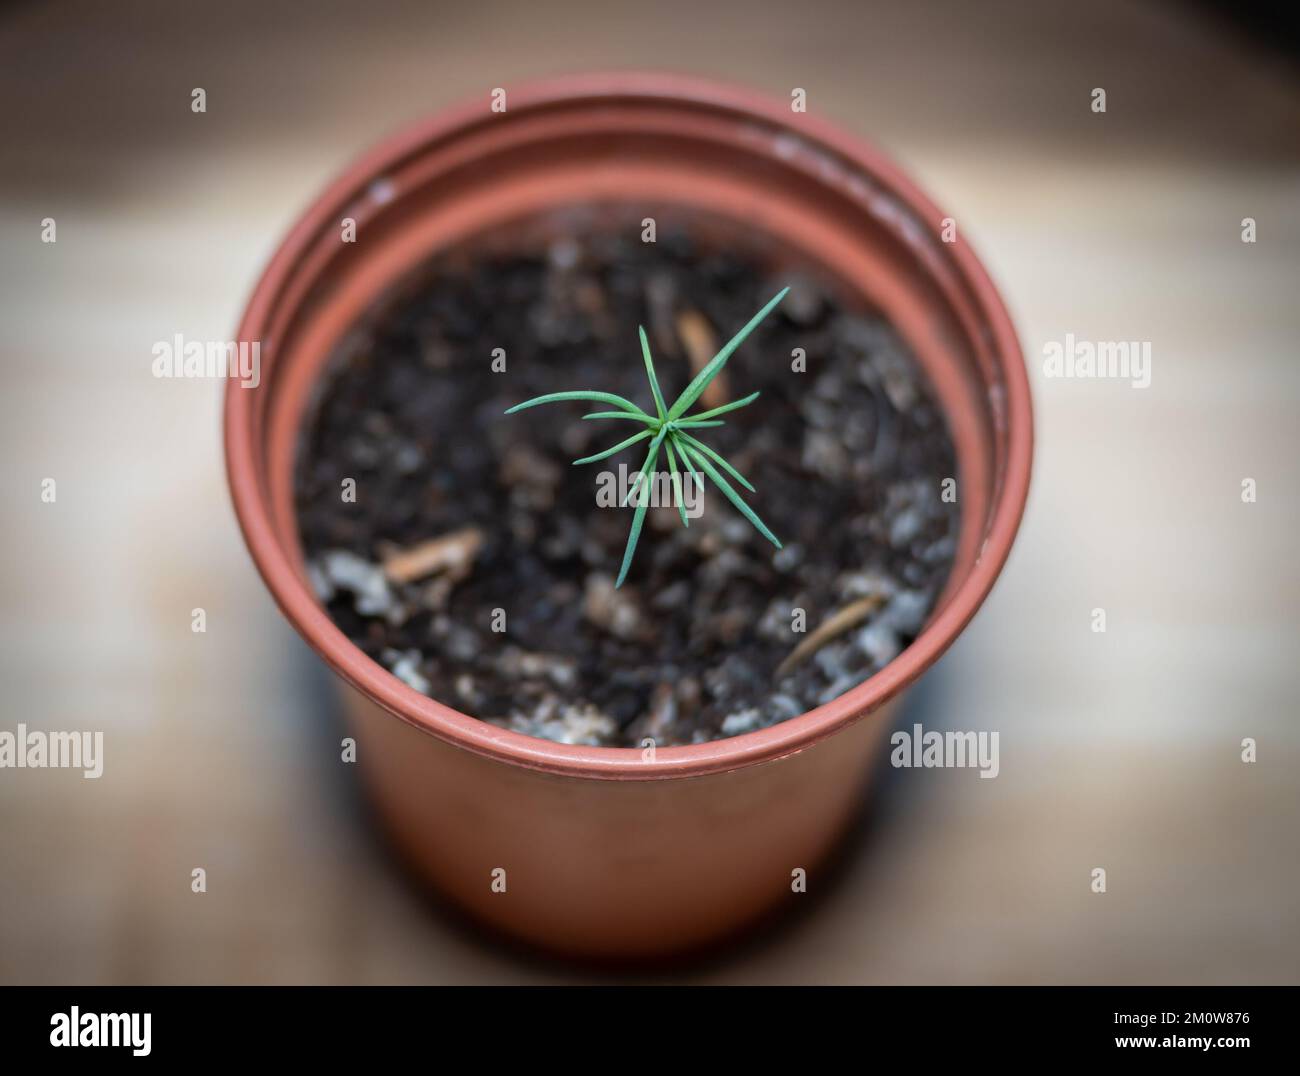 Seedling of sequoia tree in a pot, growing Sequoiadendron giganteum tree from the seed, selective focus Stock Photo